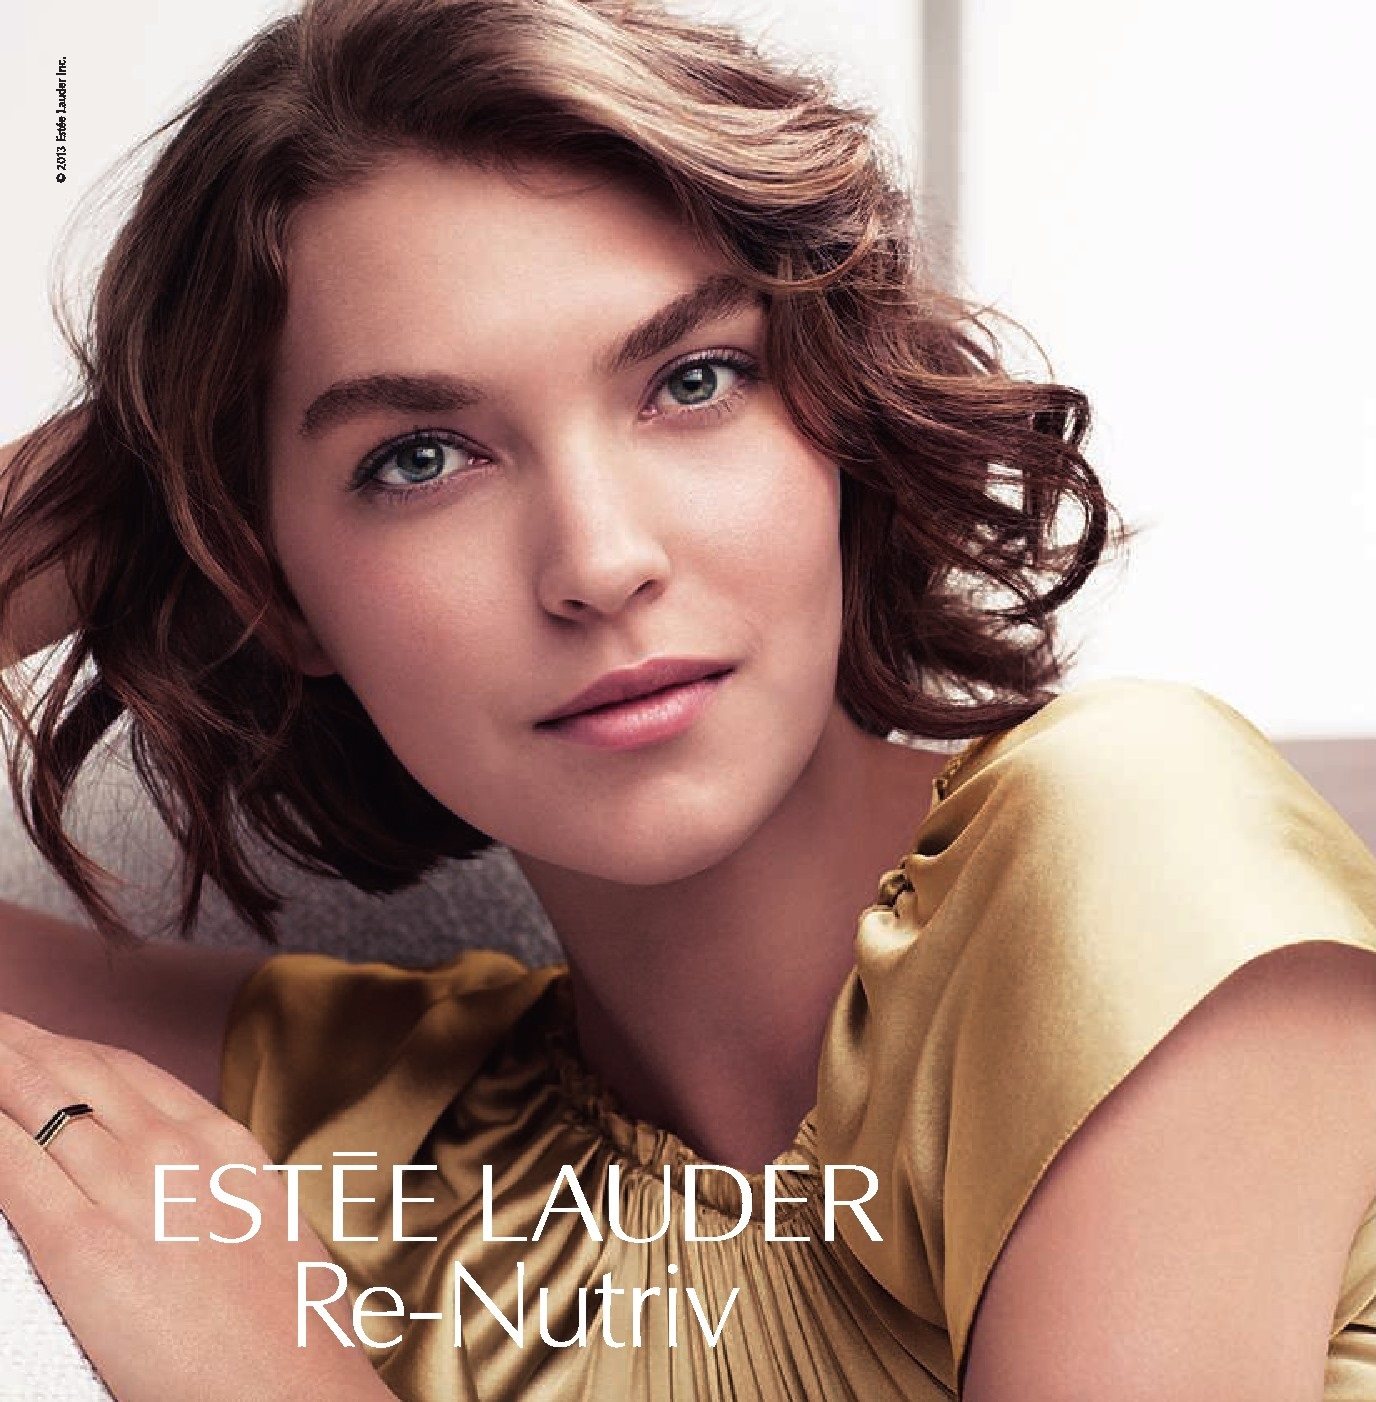 Estée Lauder to become first beauty brand in space